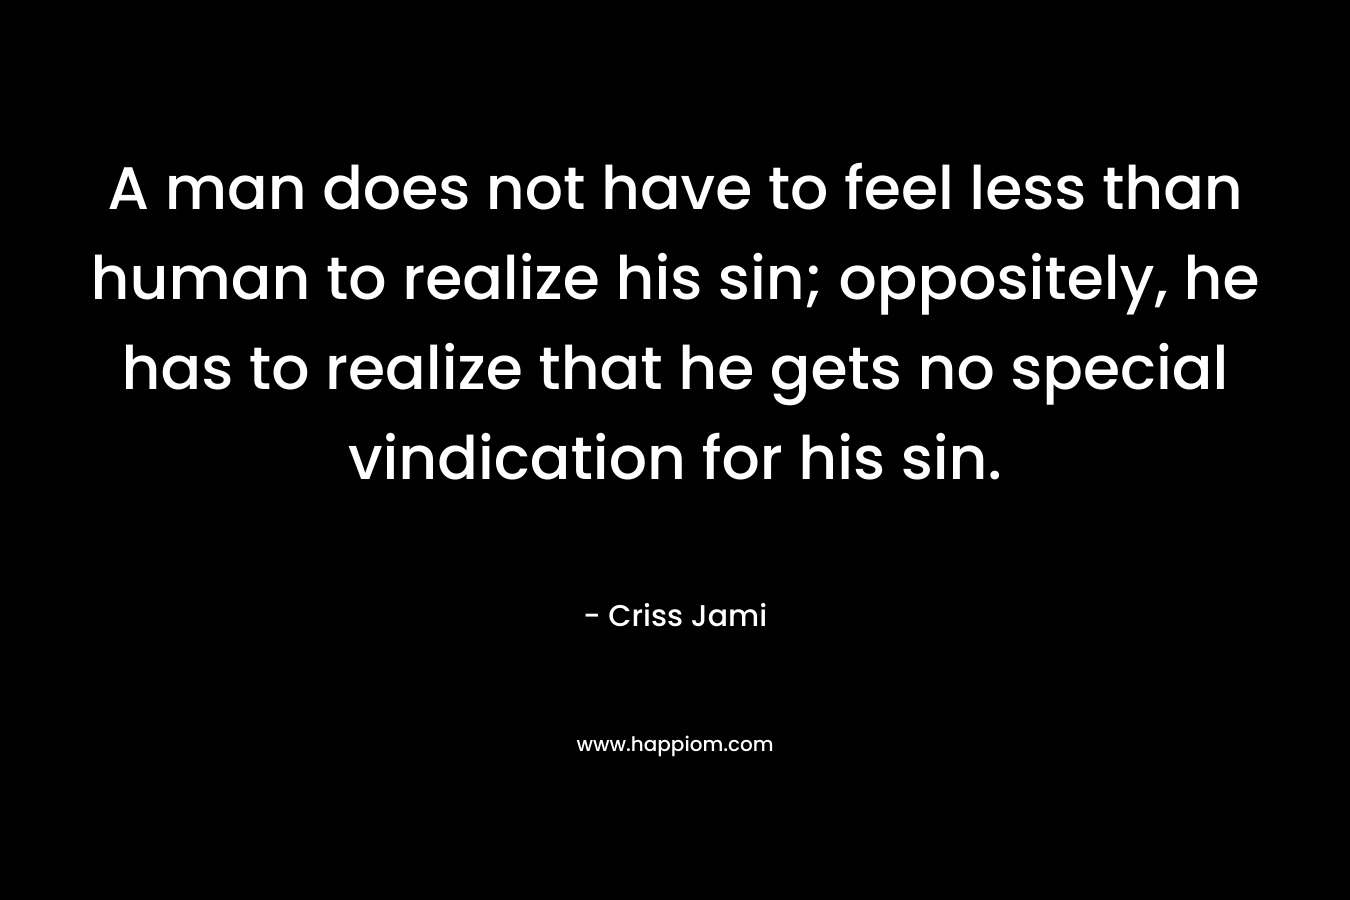 A man does not have to feel less than human to realize his sin; oppositely, he has to realize that he gets no special vindication for his sin.